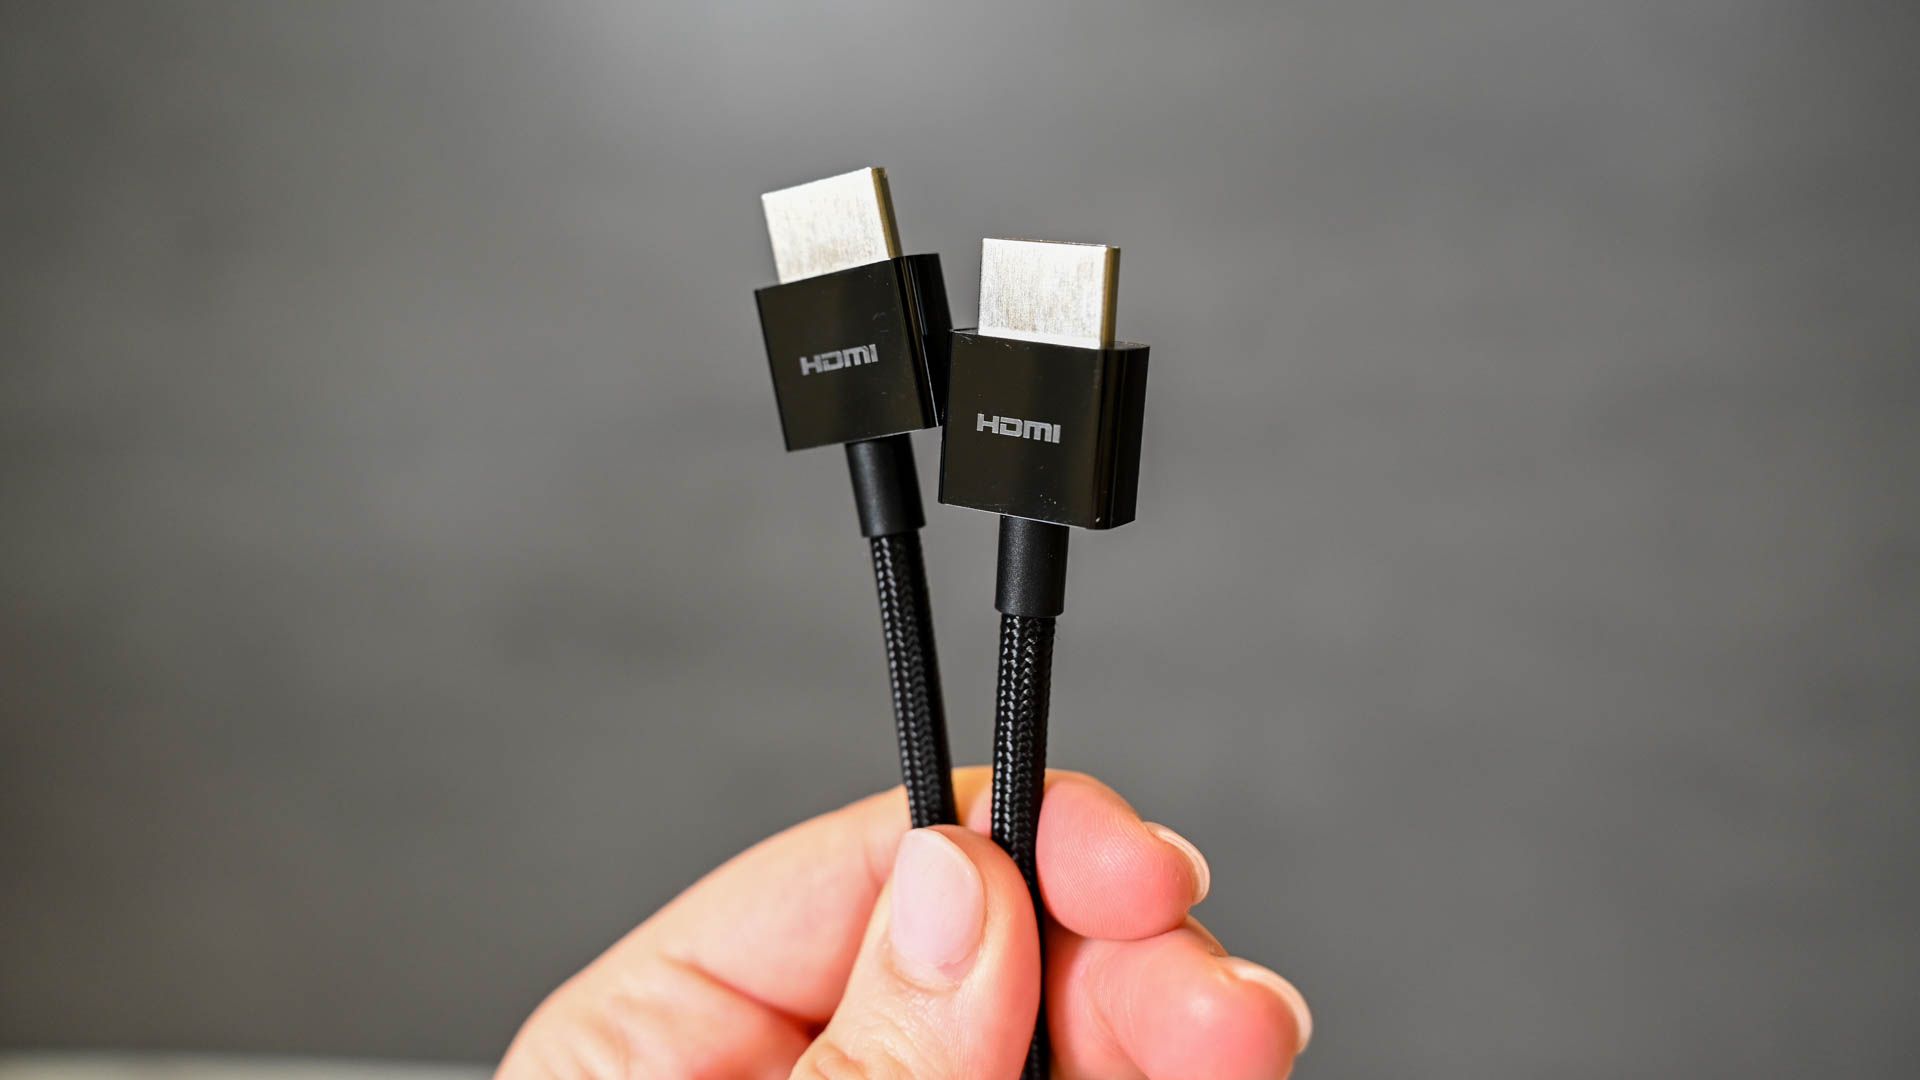 Belkin Ultra HD High Speed HDMI Cable – Learn and Buy